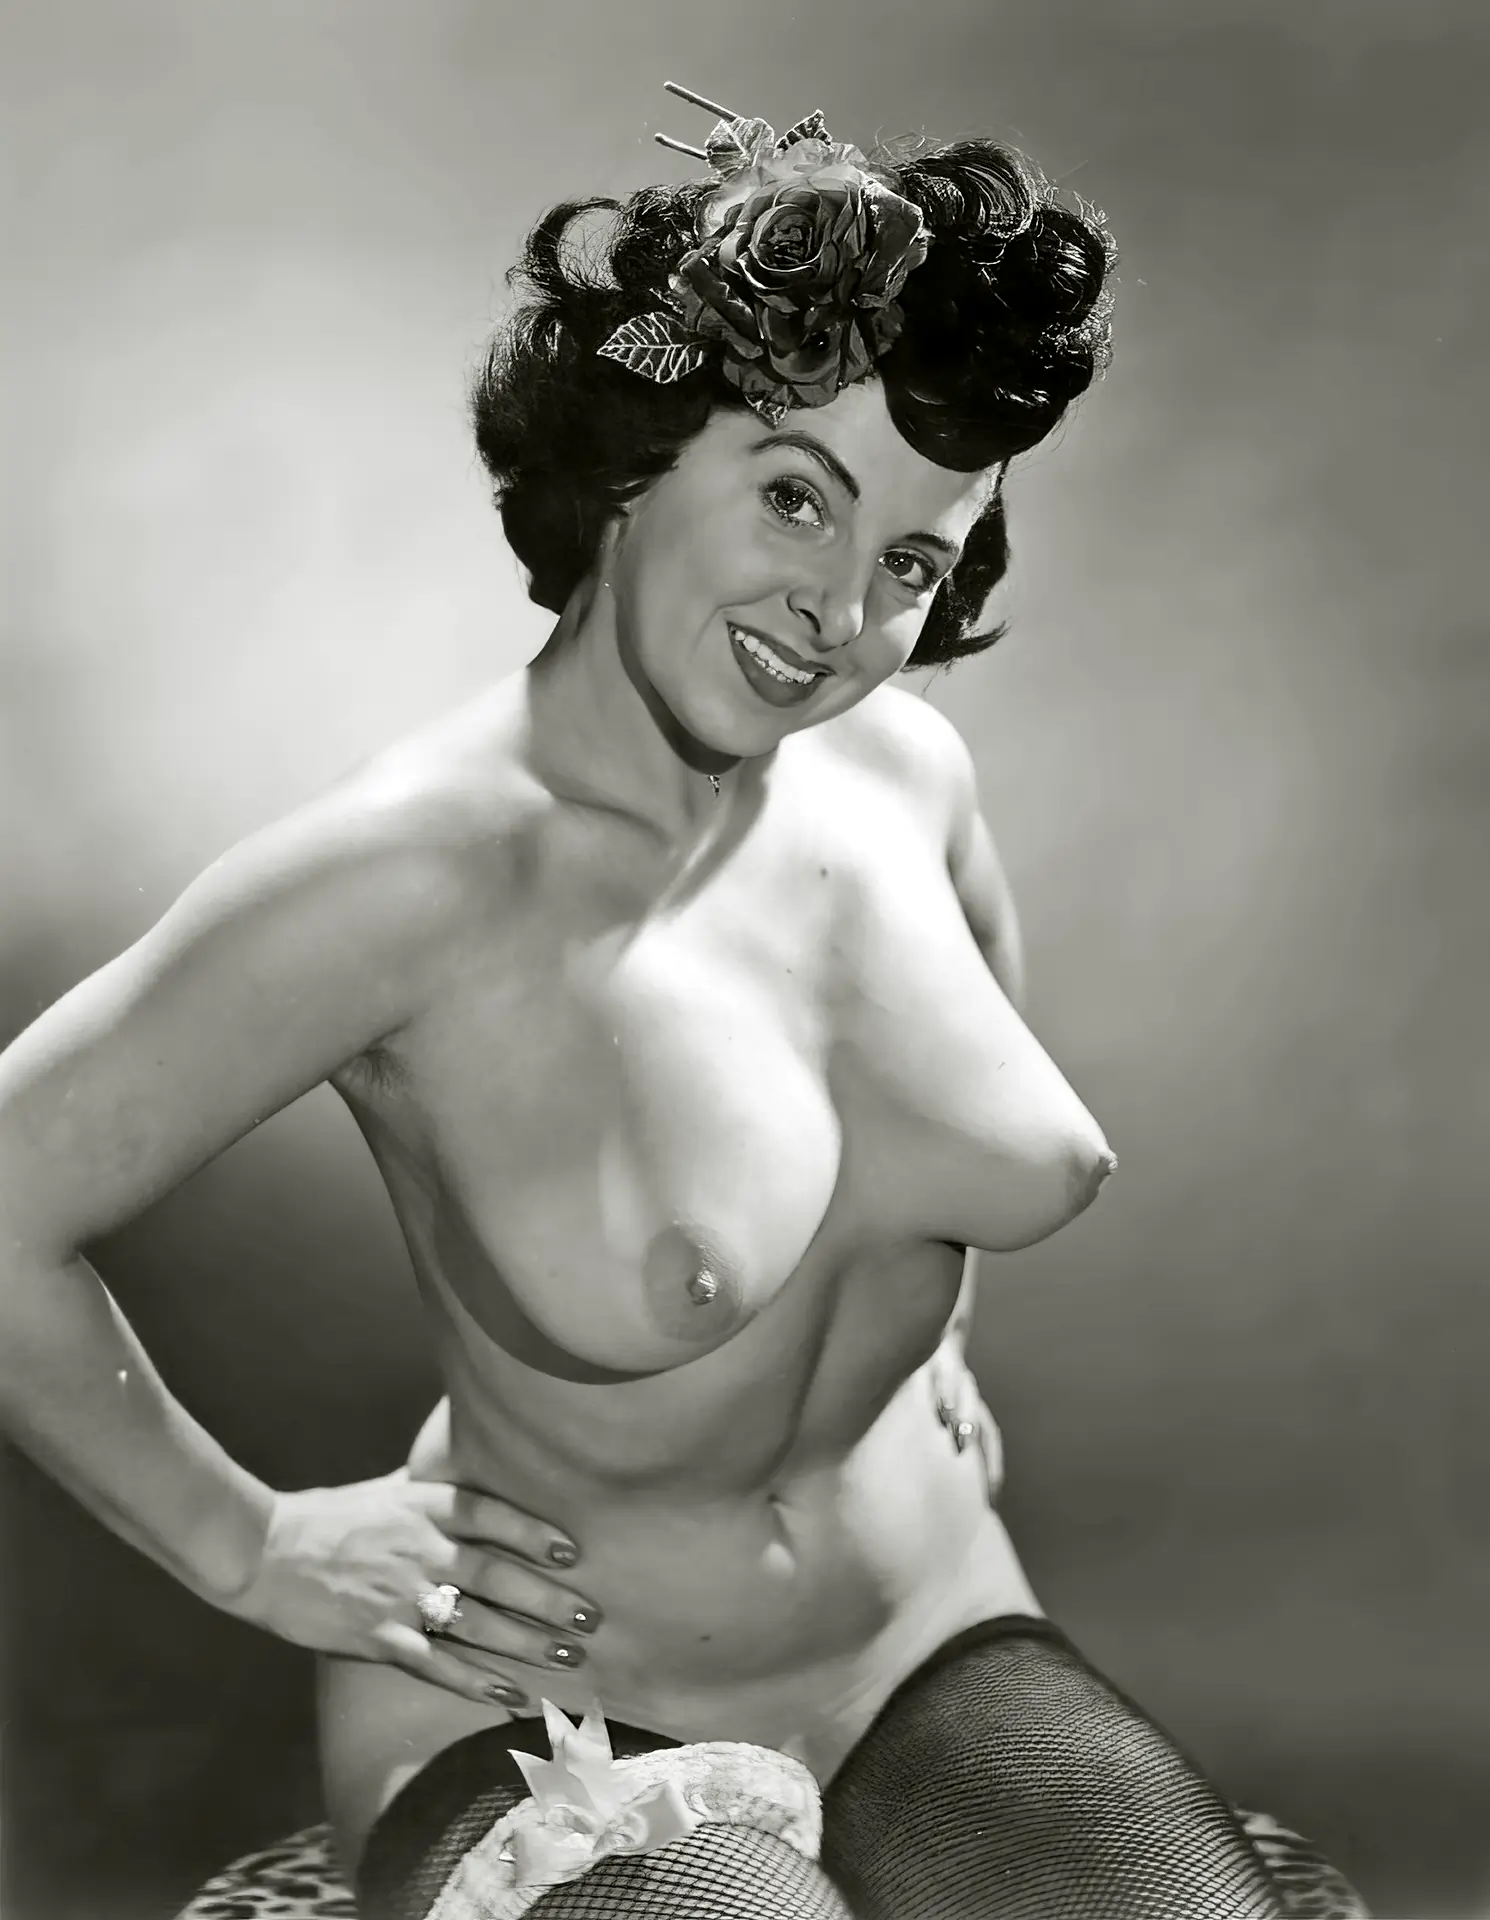 Nude female celebs of the 50s